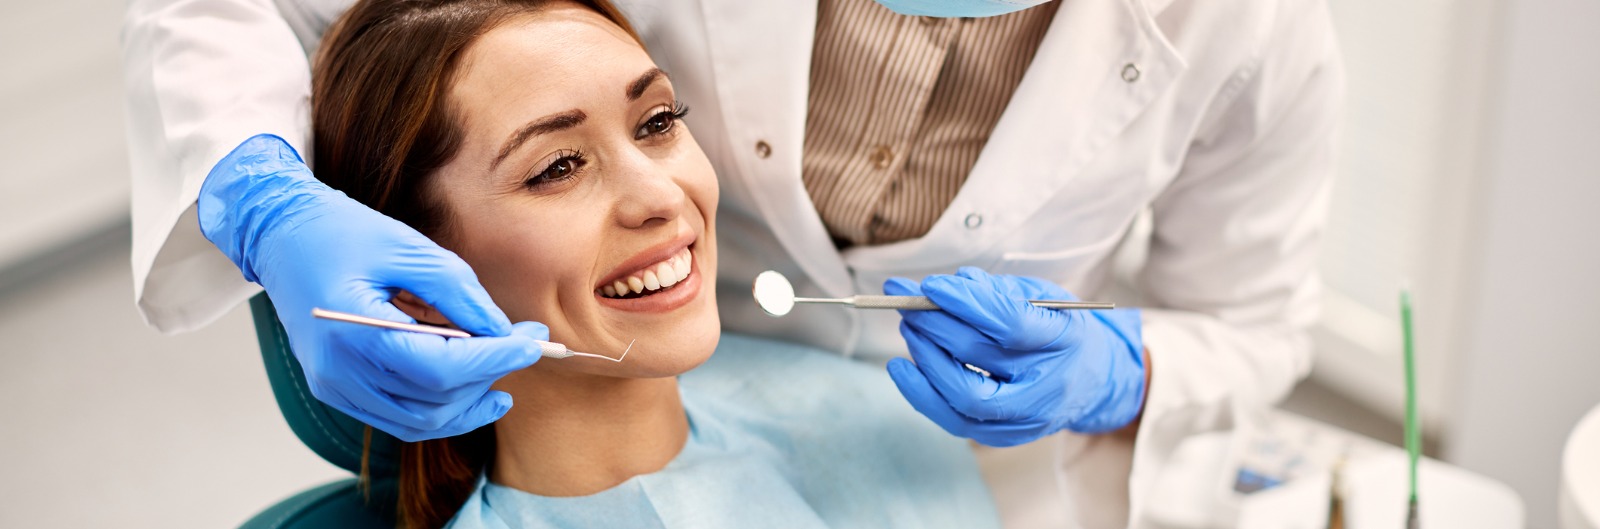 young-happy-woman-during-dental-procedure-at-dentists-office-picture-id1600x529.jpg